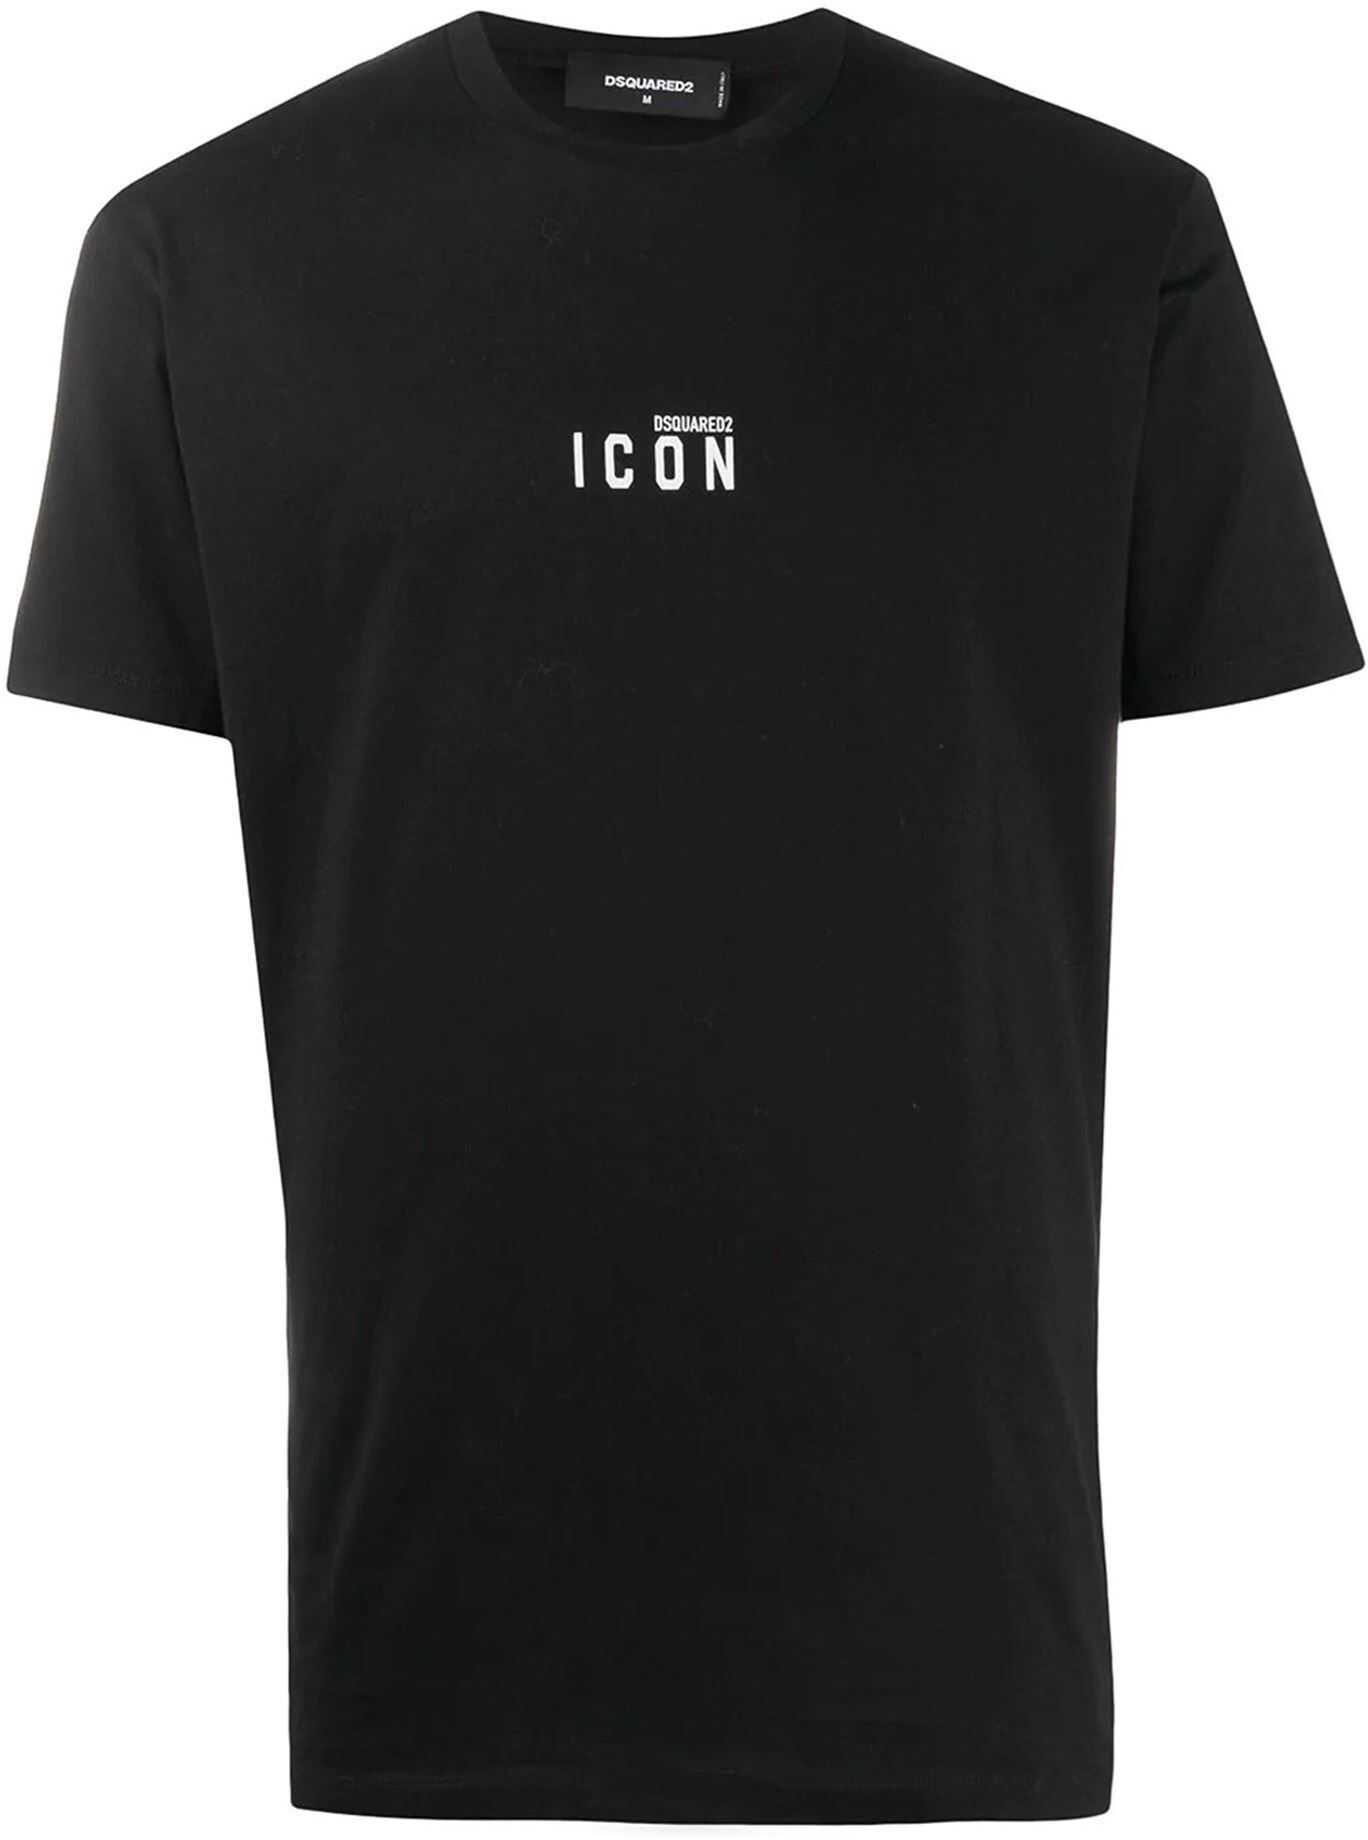 DSQUARED2 Icon Printed Cotton T-Shirt In Black Black